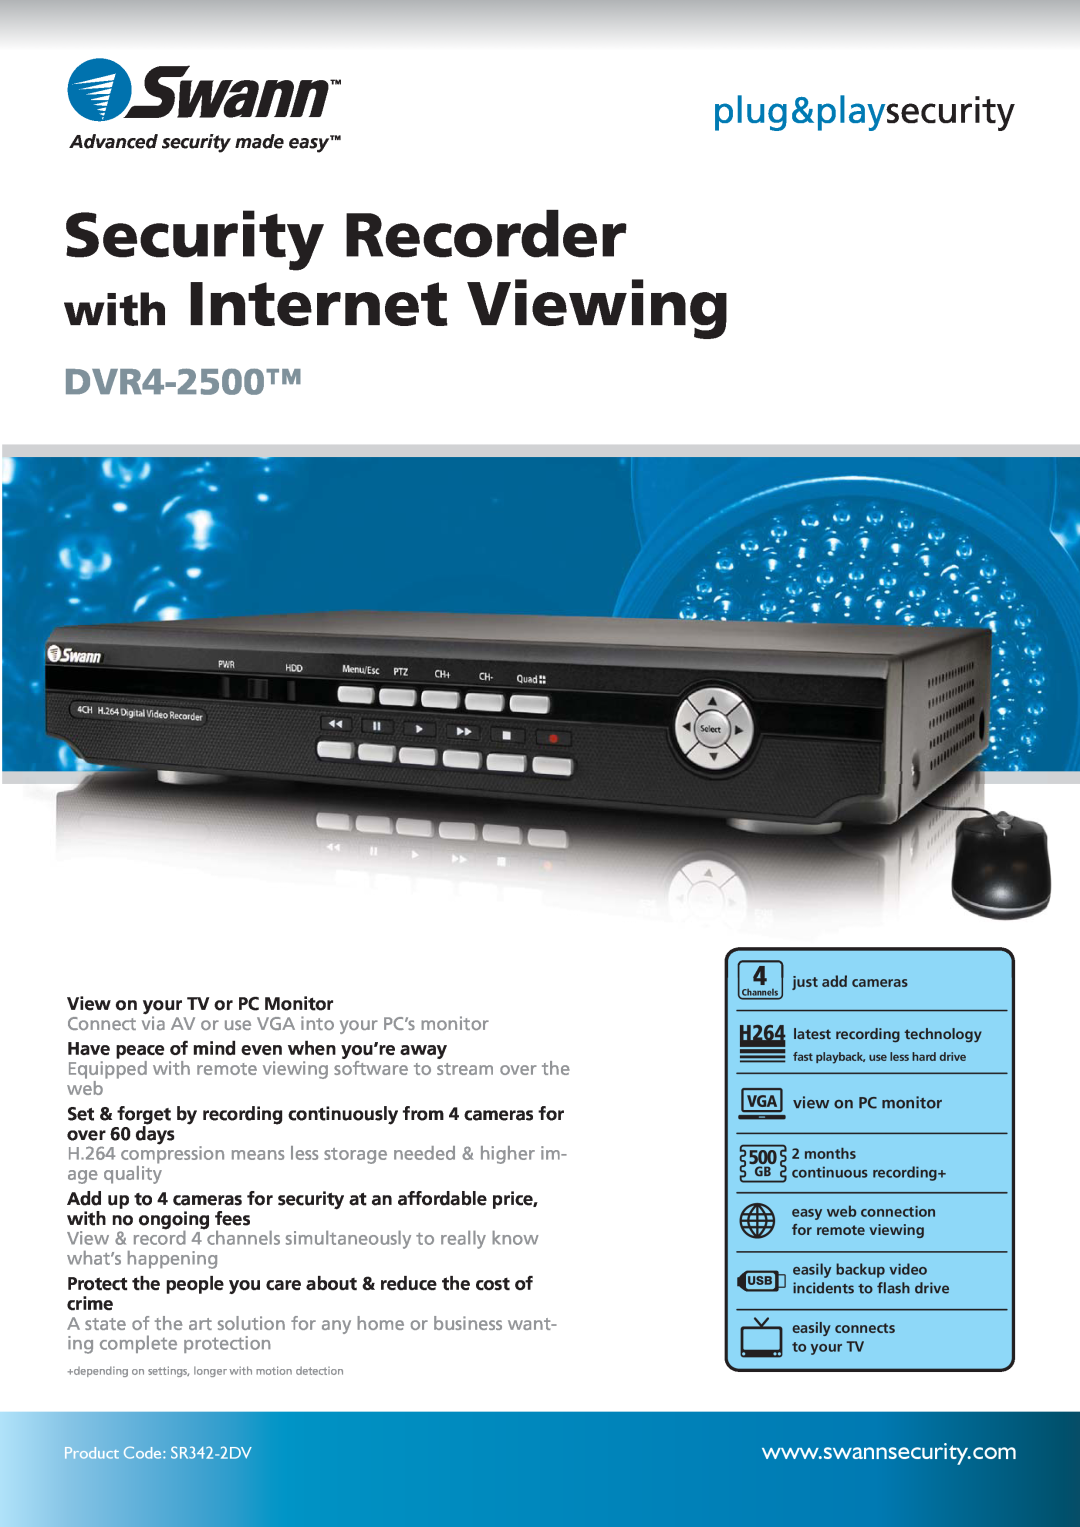 Swann SR342-2DV manual Security Recorder with Internet Viewing, plug&playsecurity, DVR4-2500, Advanced security made easy 